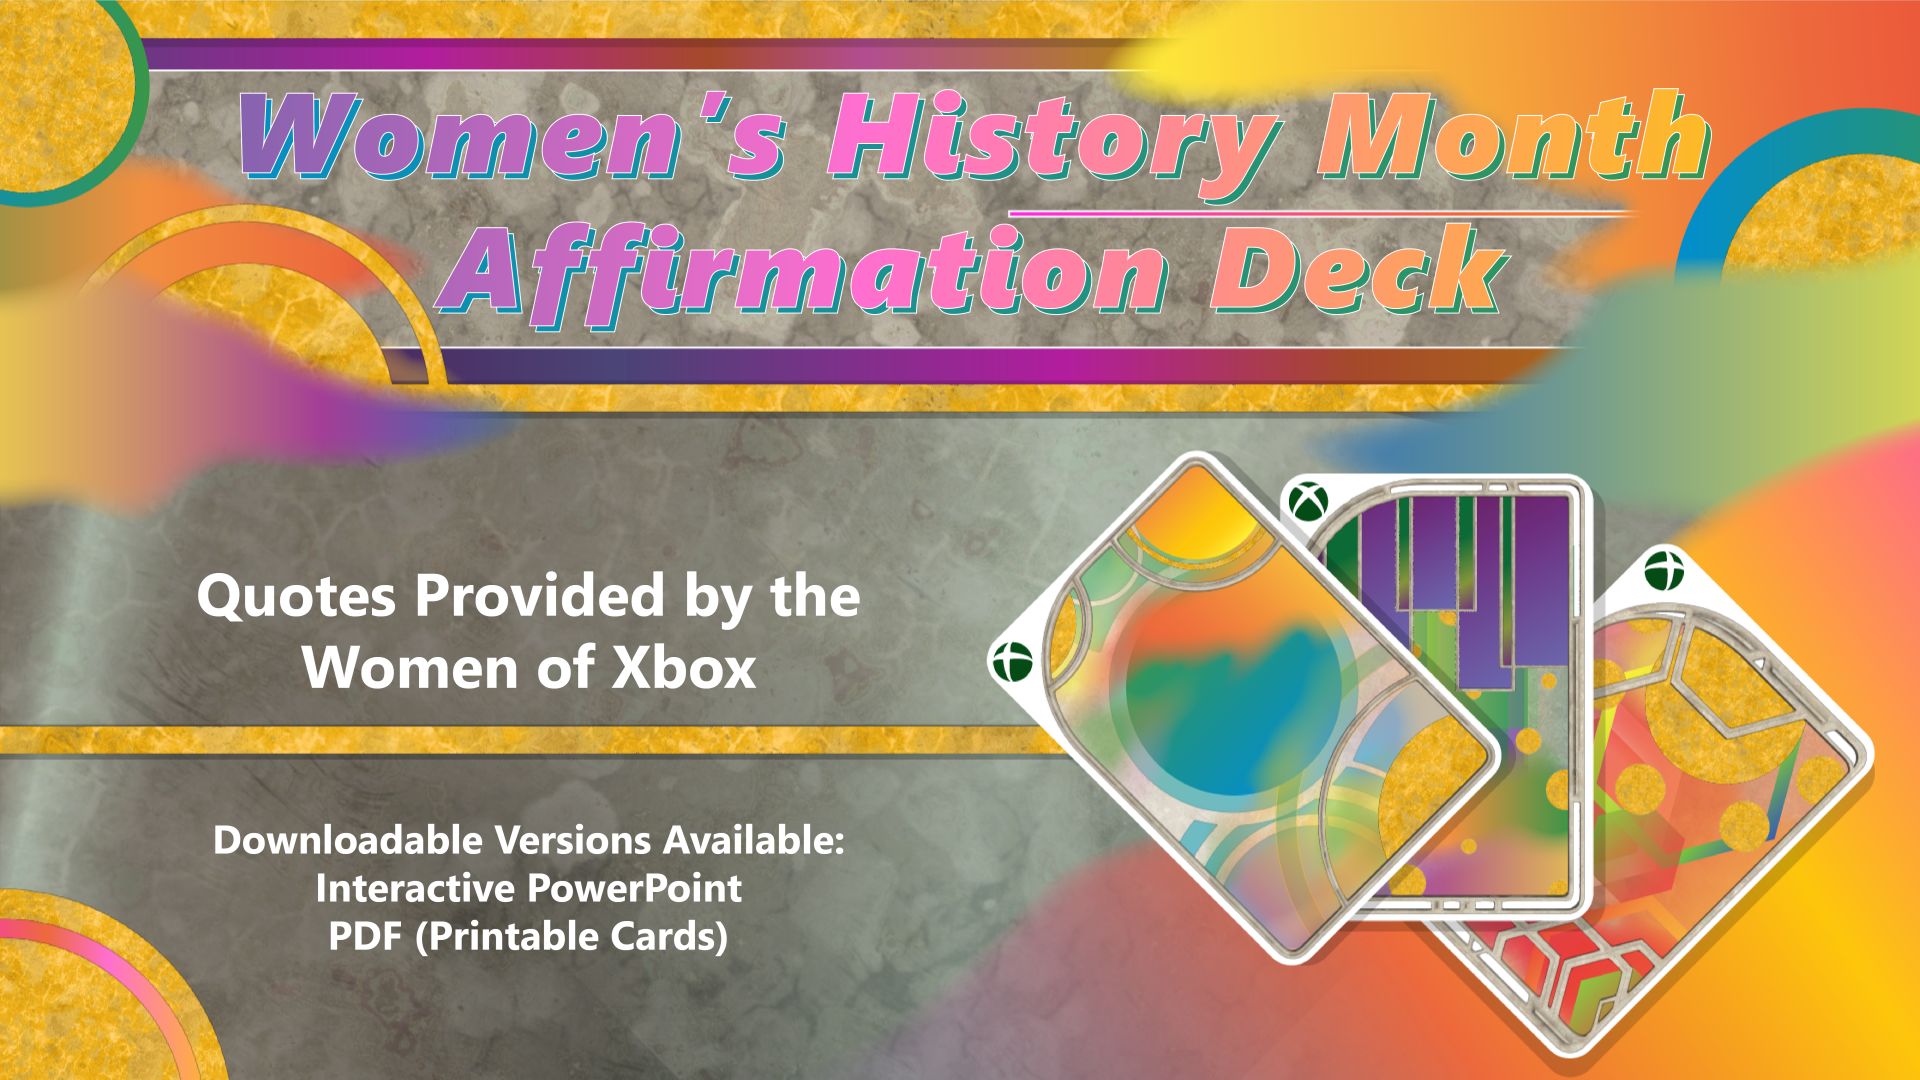 Downloadable and Printable Versions Available of the Women’s History Month Affirmation Deck.